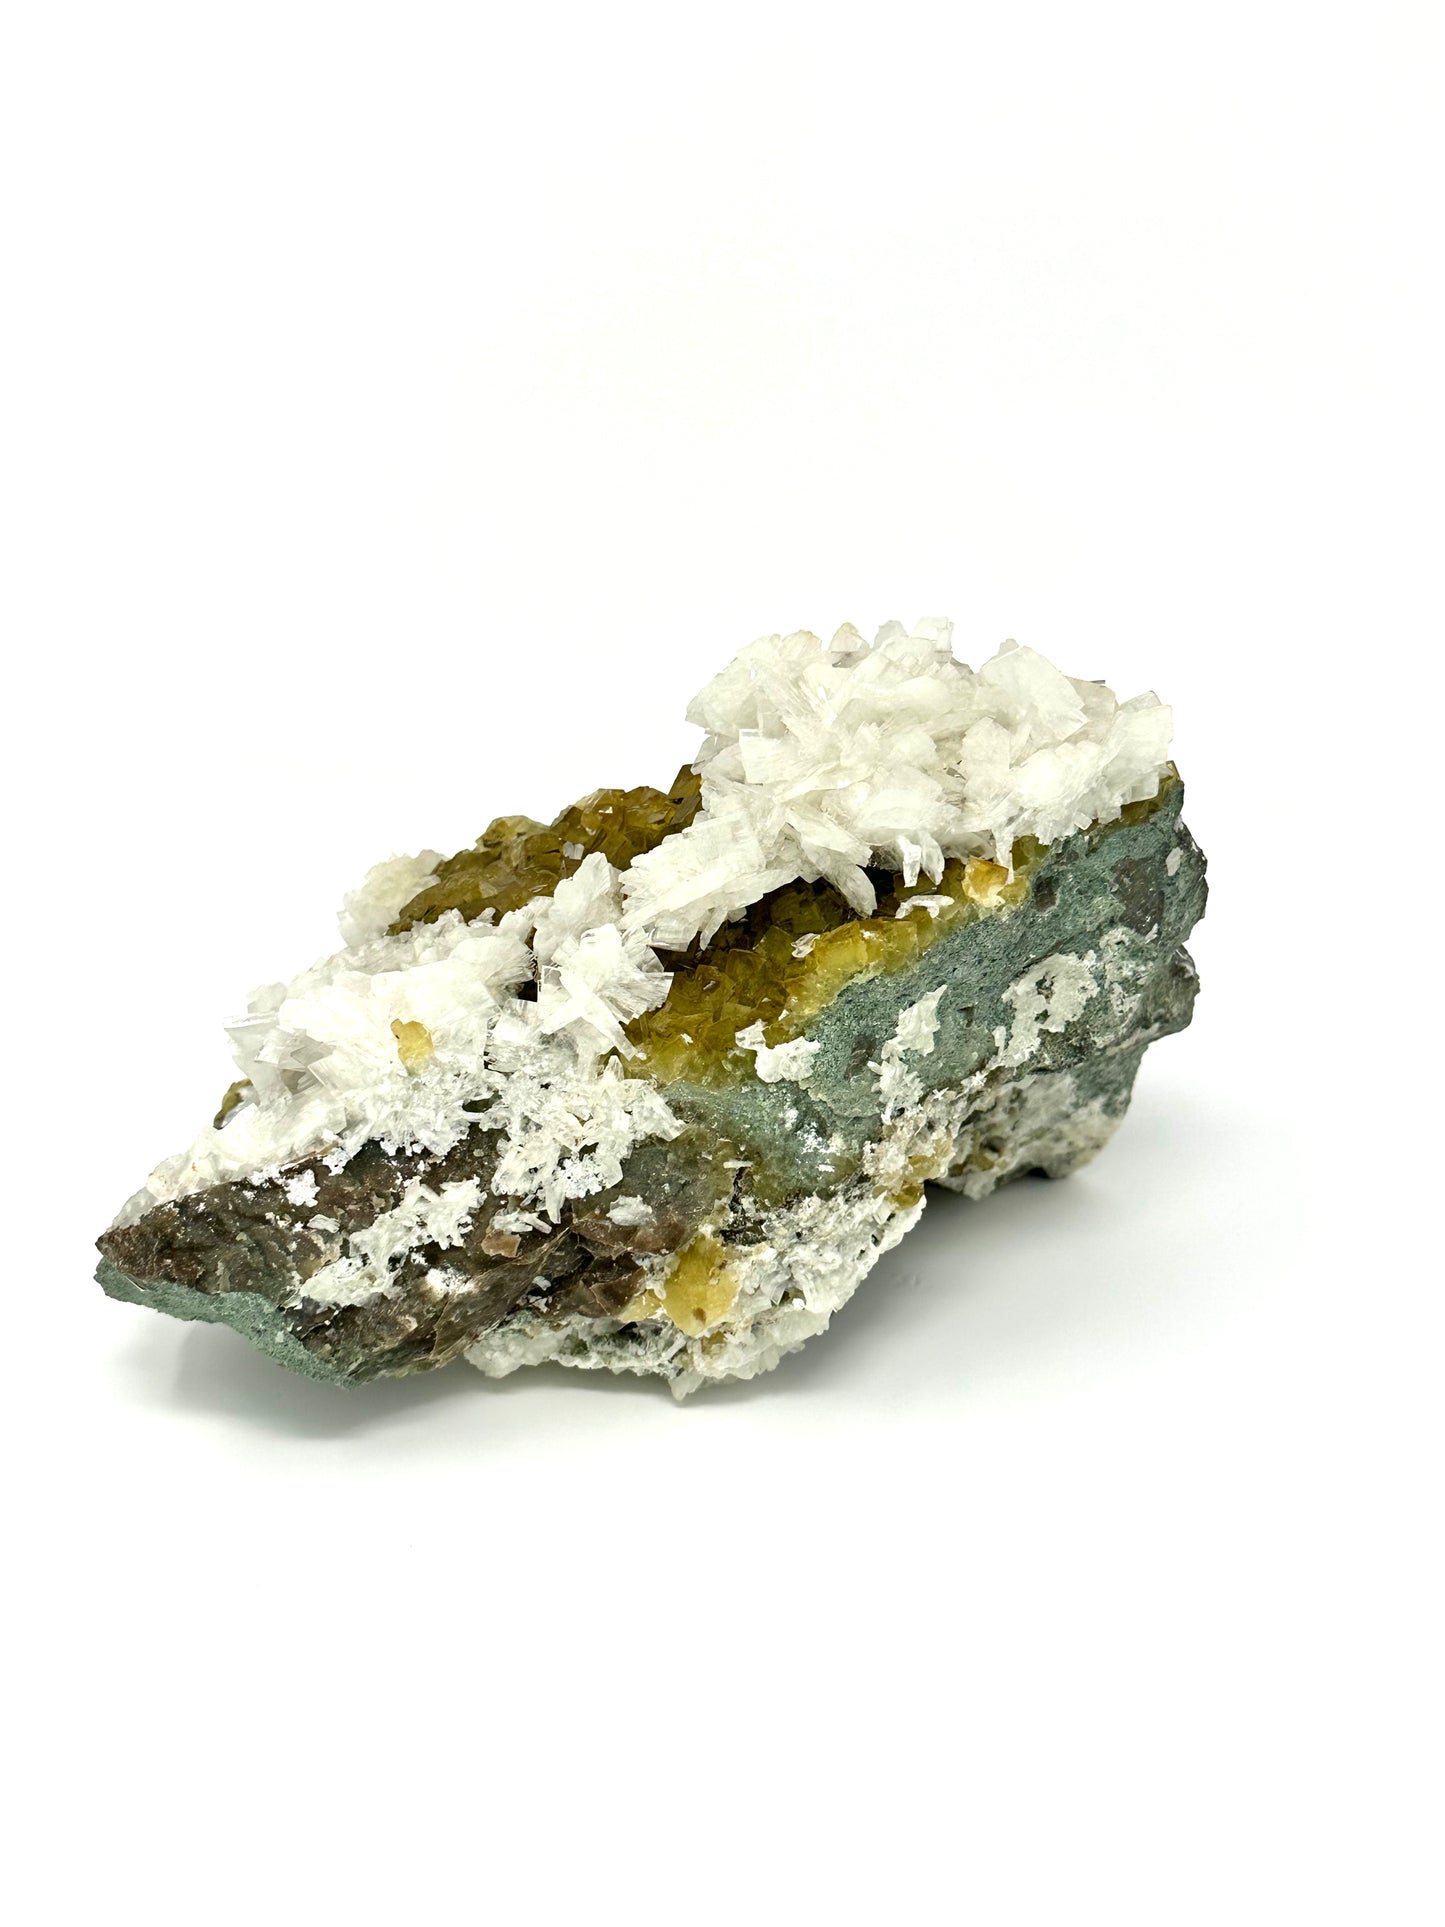 Large Cluster of Barite on Fluorite